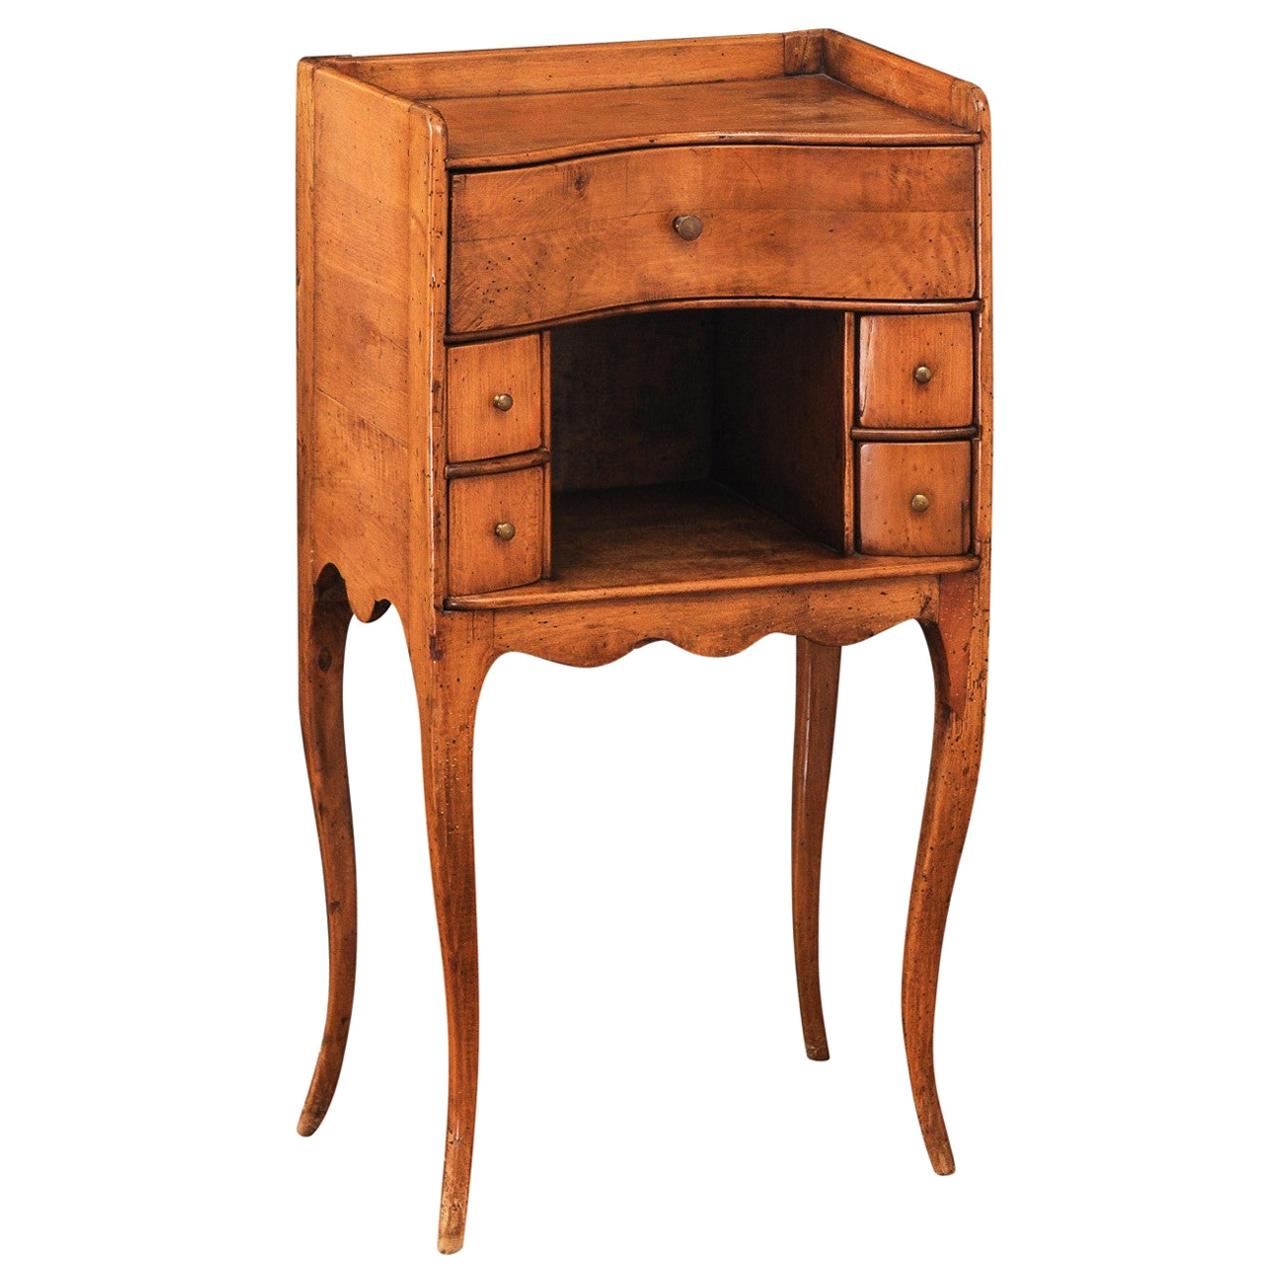 French 1860s Napoléon III Walnut Side Table with Five Drawers and Open Shelf